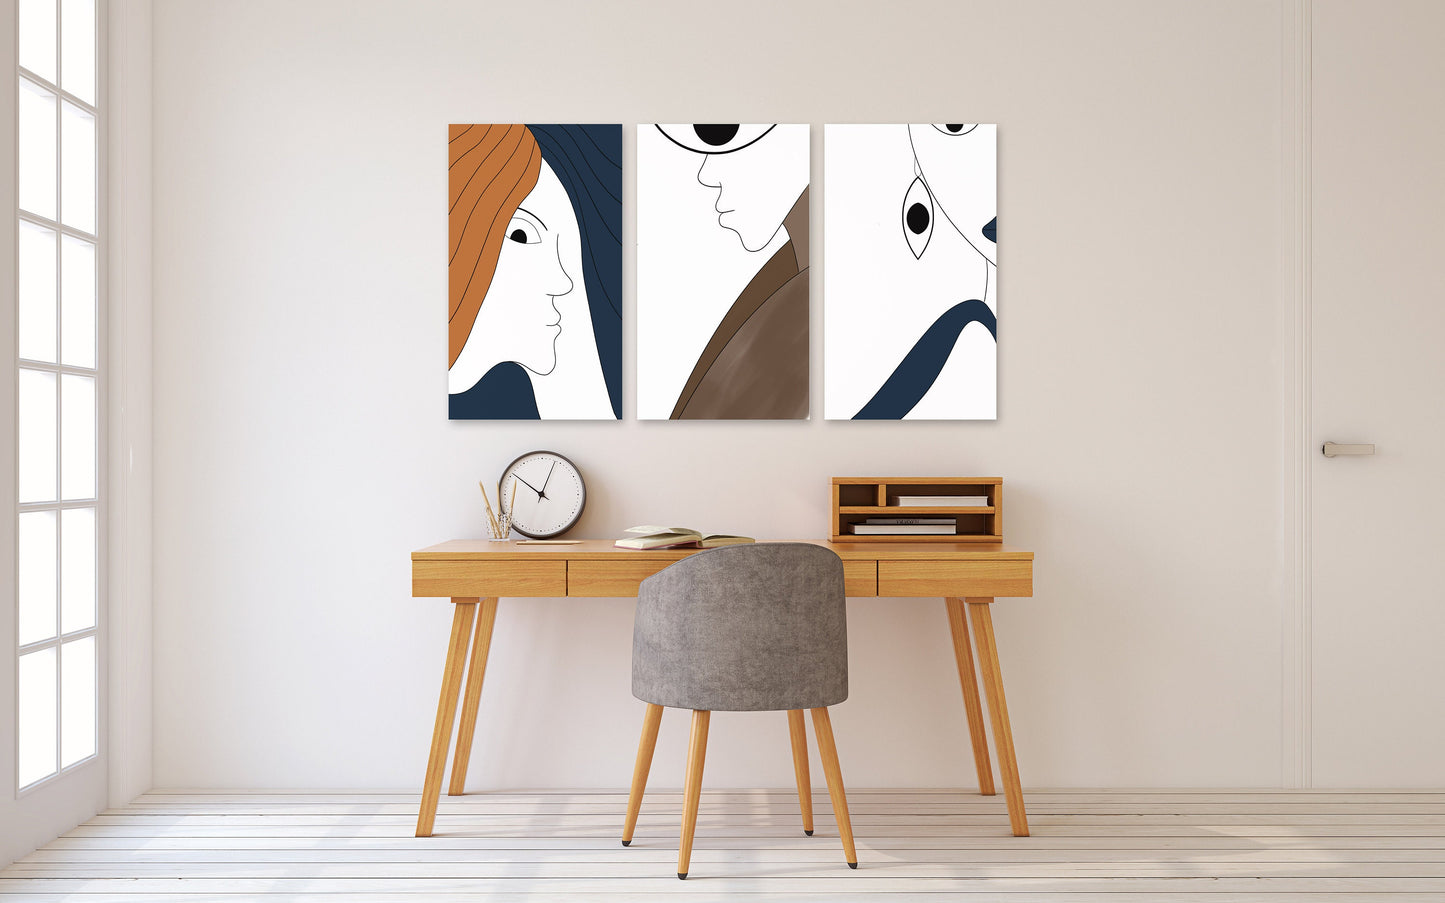 Framed faces modern 3 prints wall art abstract canvas home wall decor bedroom living room canvas paintings